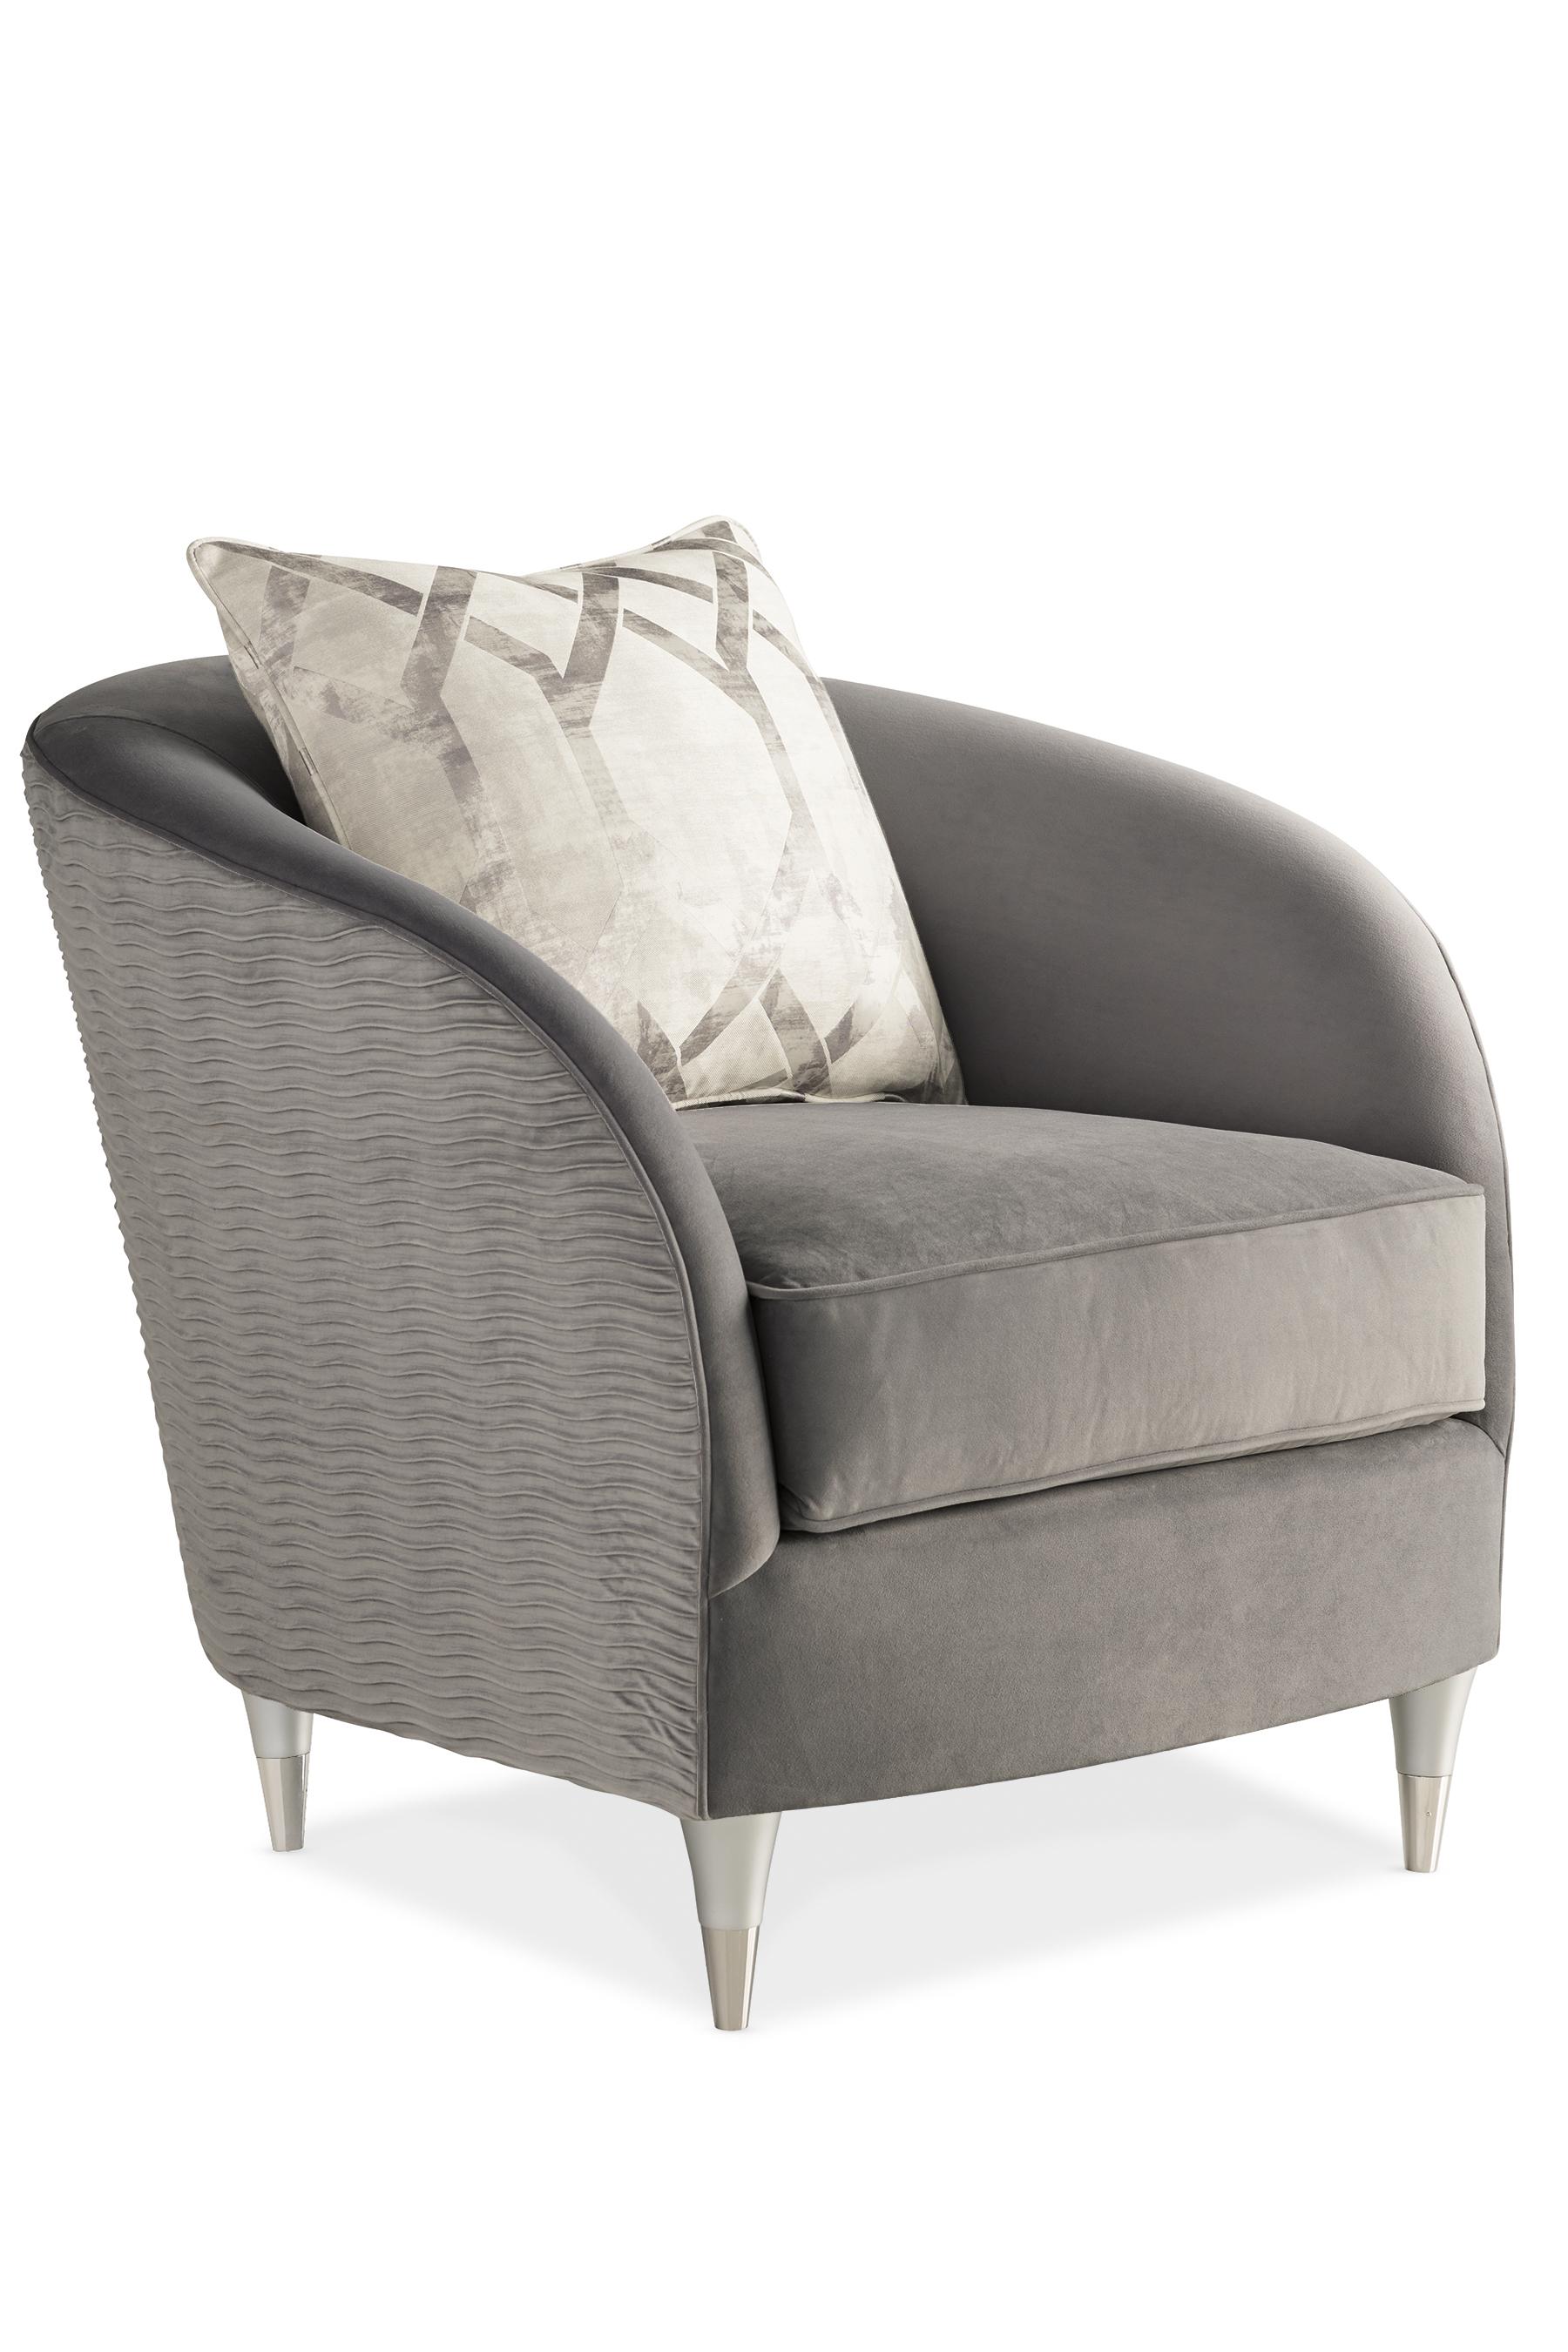 Contemporary Accent Chair FARRAH 9260-004-A in Light Grey Fabric